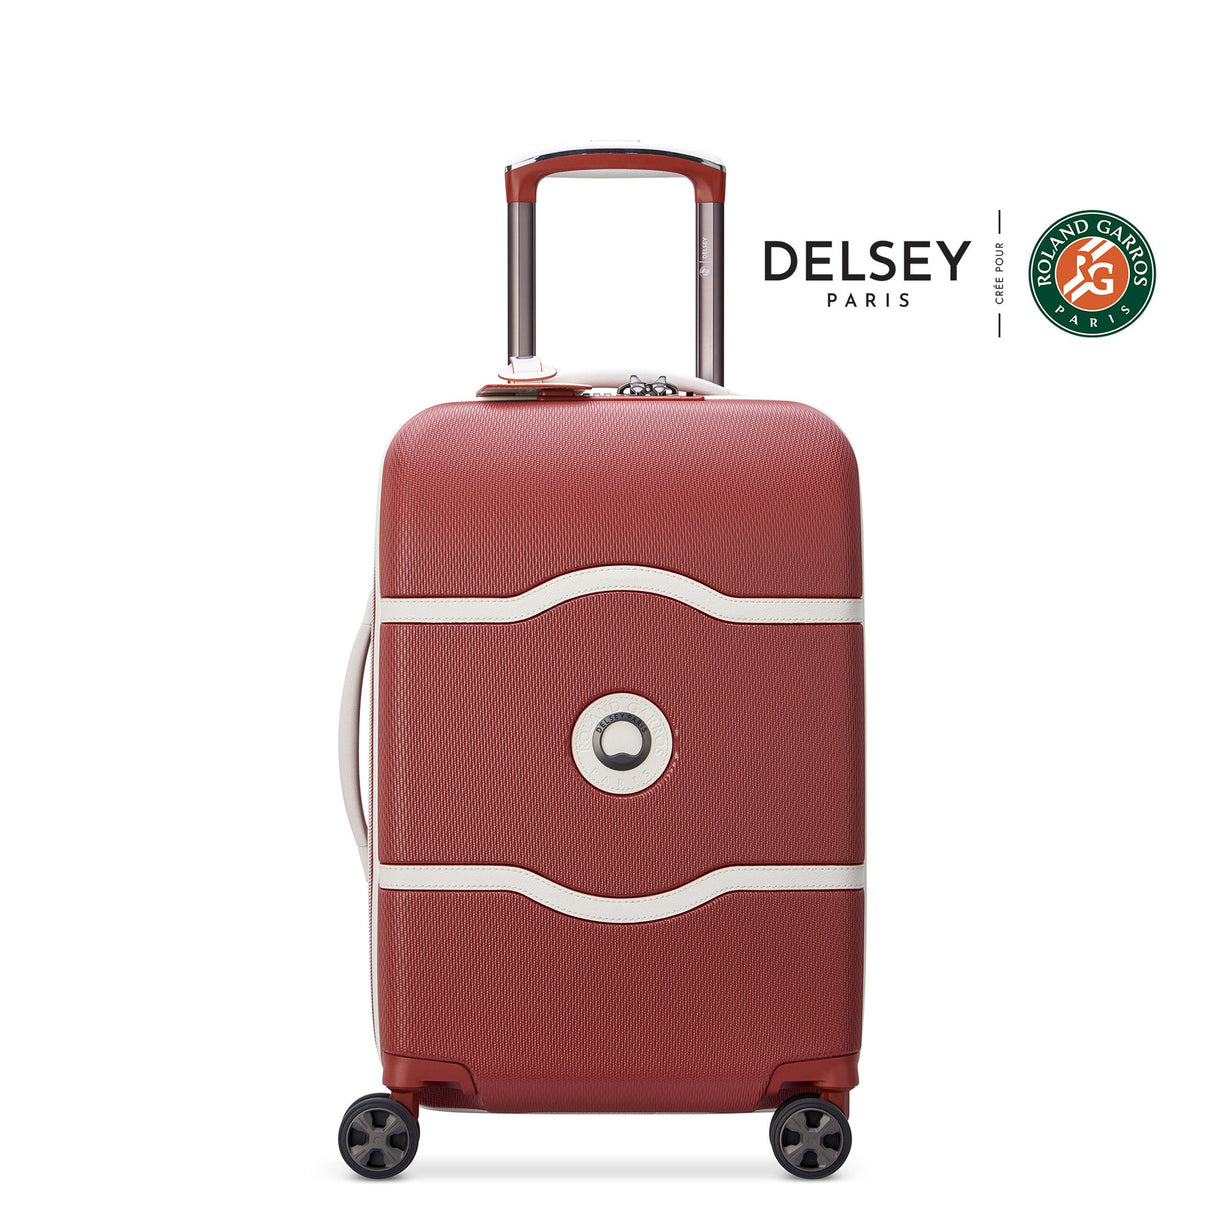 Delsey Chatelet Air 2.0 Carry-on 19" Spinner , , delsey-chatelet-air-2.0-40167680135RG-01_1800x1800_935ef8ff-04a9-4b39-a829-4bed9f243e87